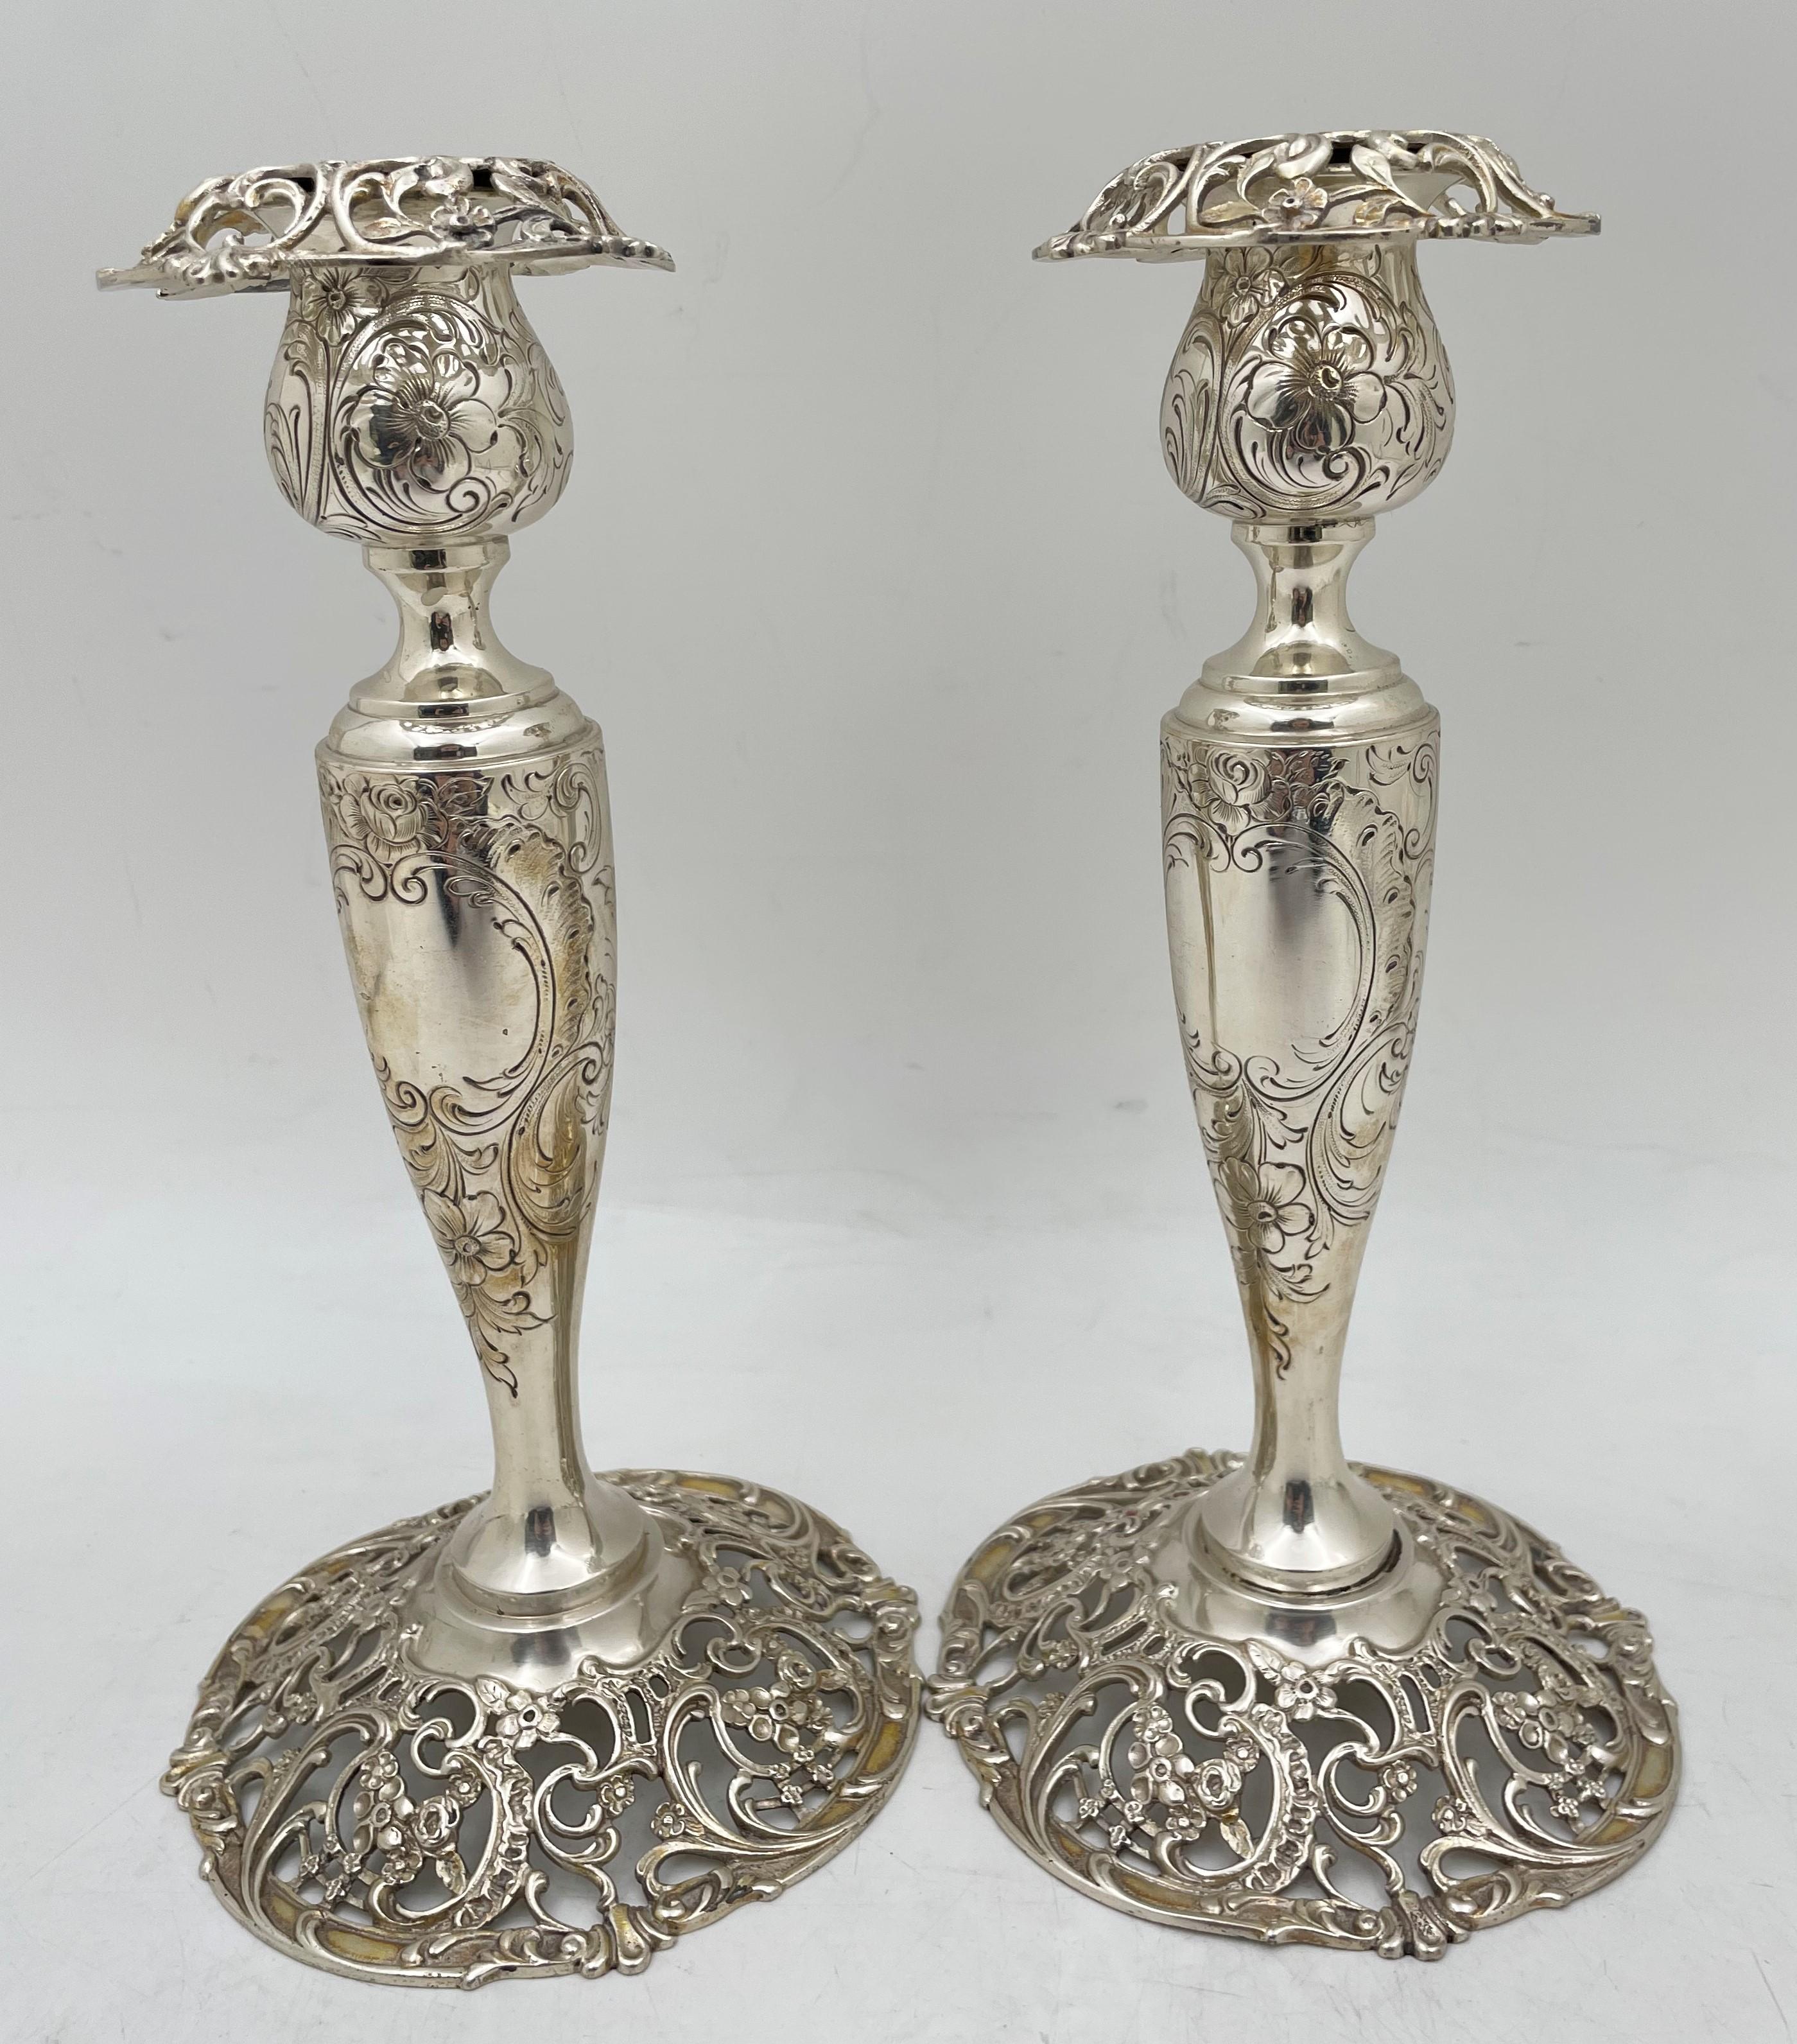 Pair of American, sterling silver candlesticks, presumably from the early 20th century, in Art Nouveau style with exquisite floral motifs adorning the body as well as the pierced rim and base. They Measure 9'' in height by 4 3/4'' in diameter at the